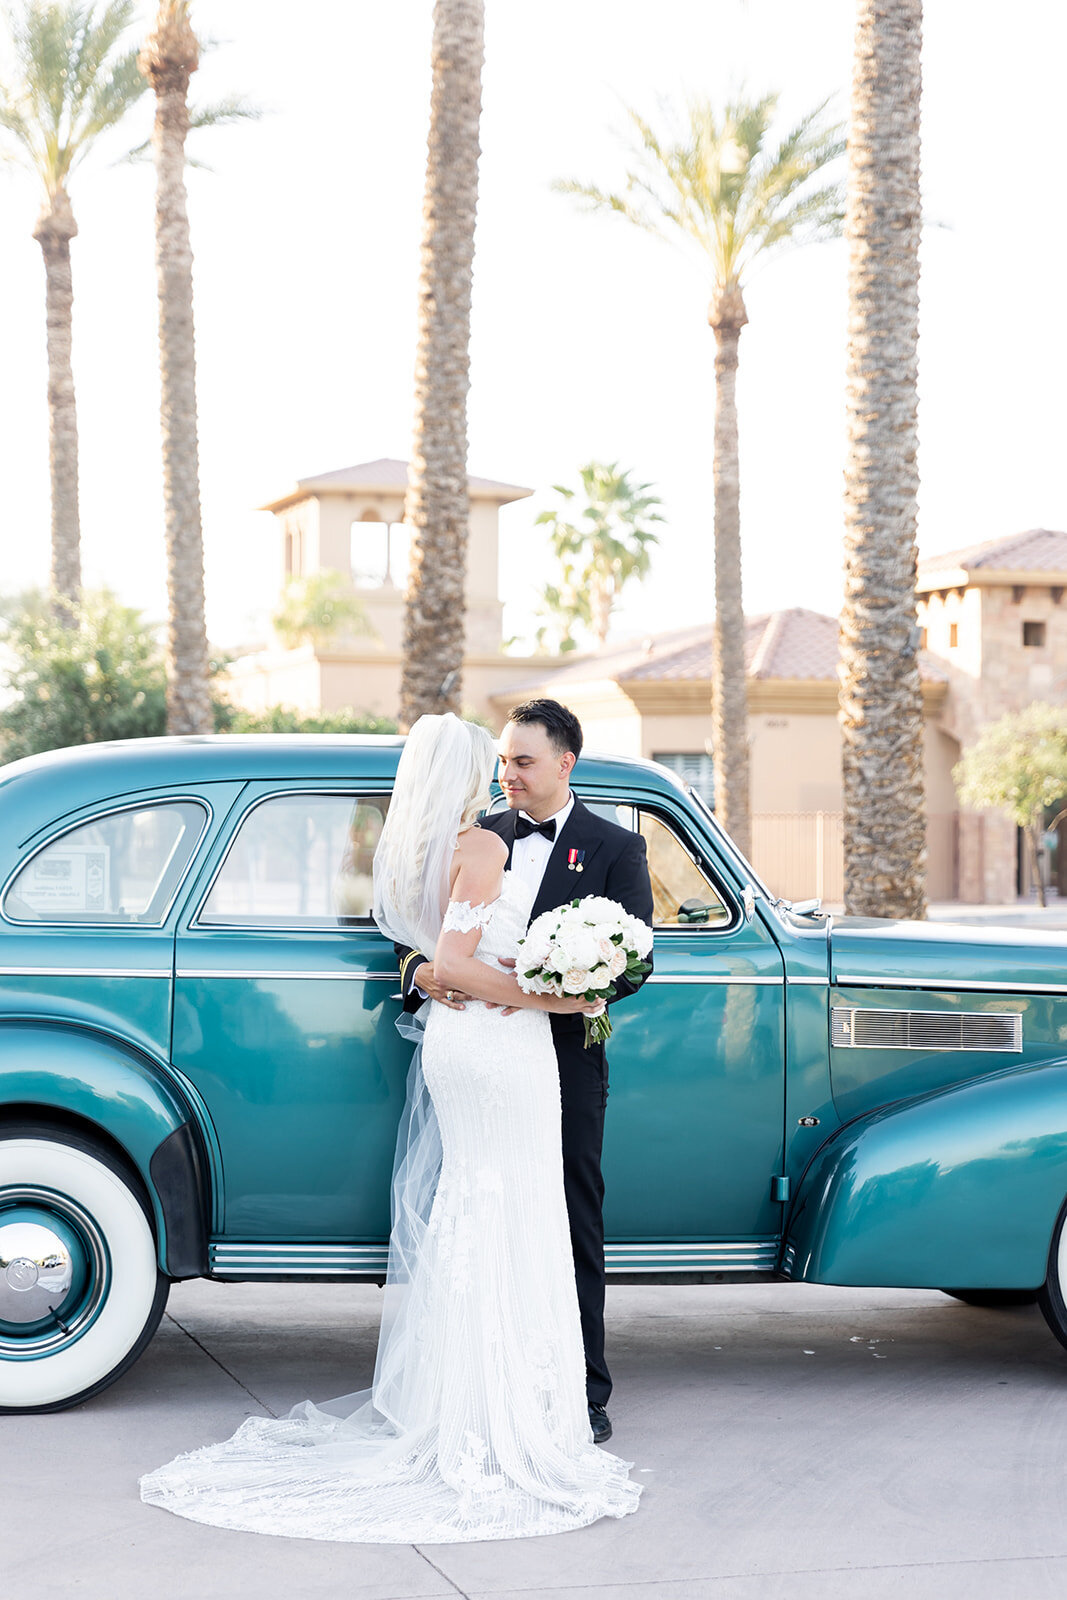 Karlie Colleen Photography - Holly & Ronnie Wedding - Seville Country Club - Gilbert Arizona-720